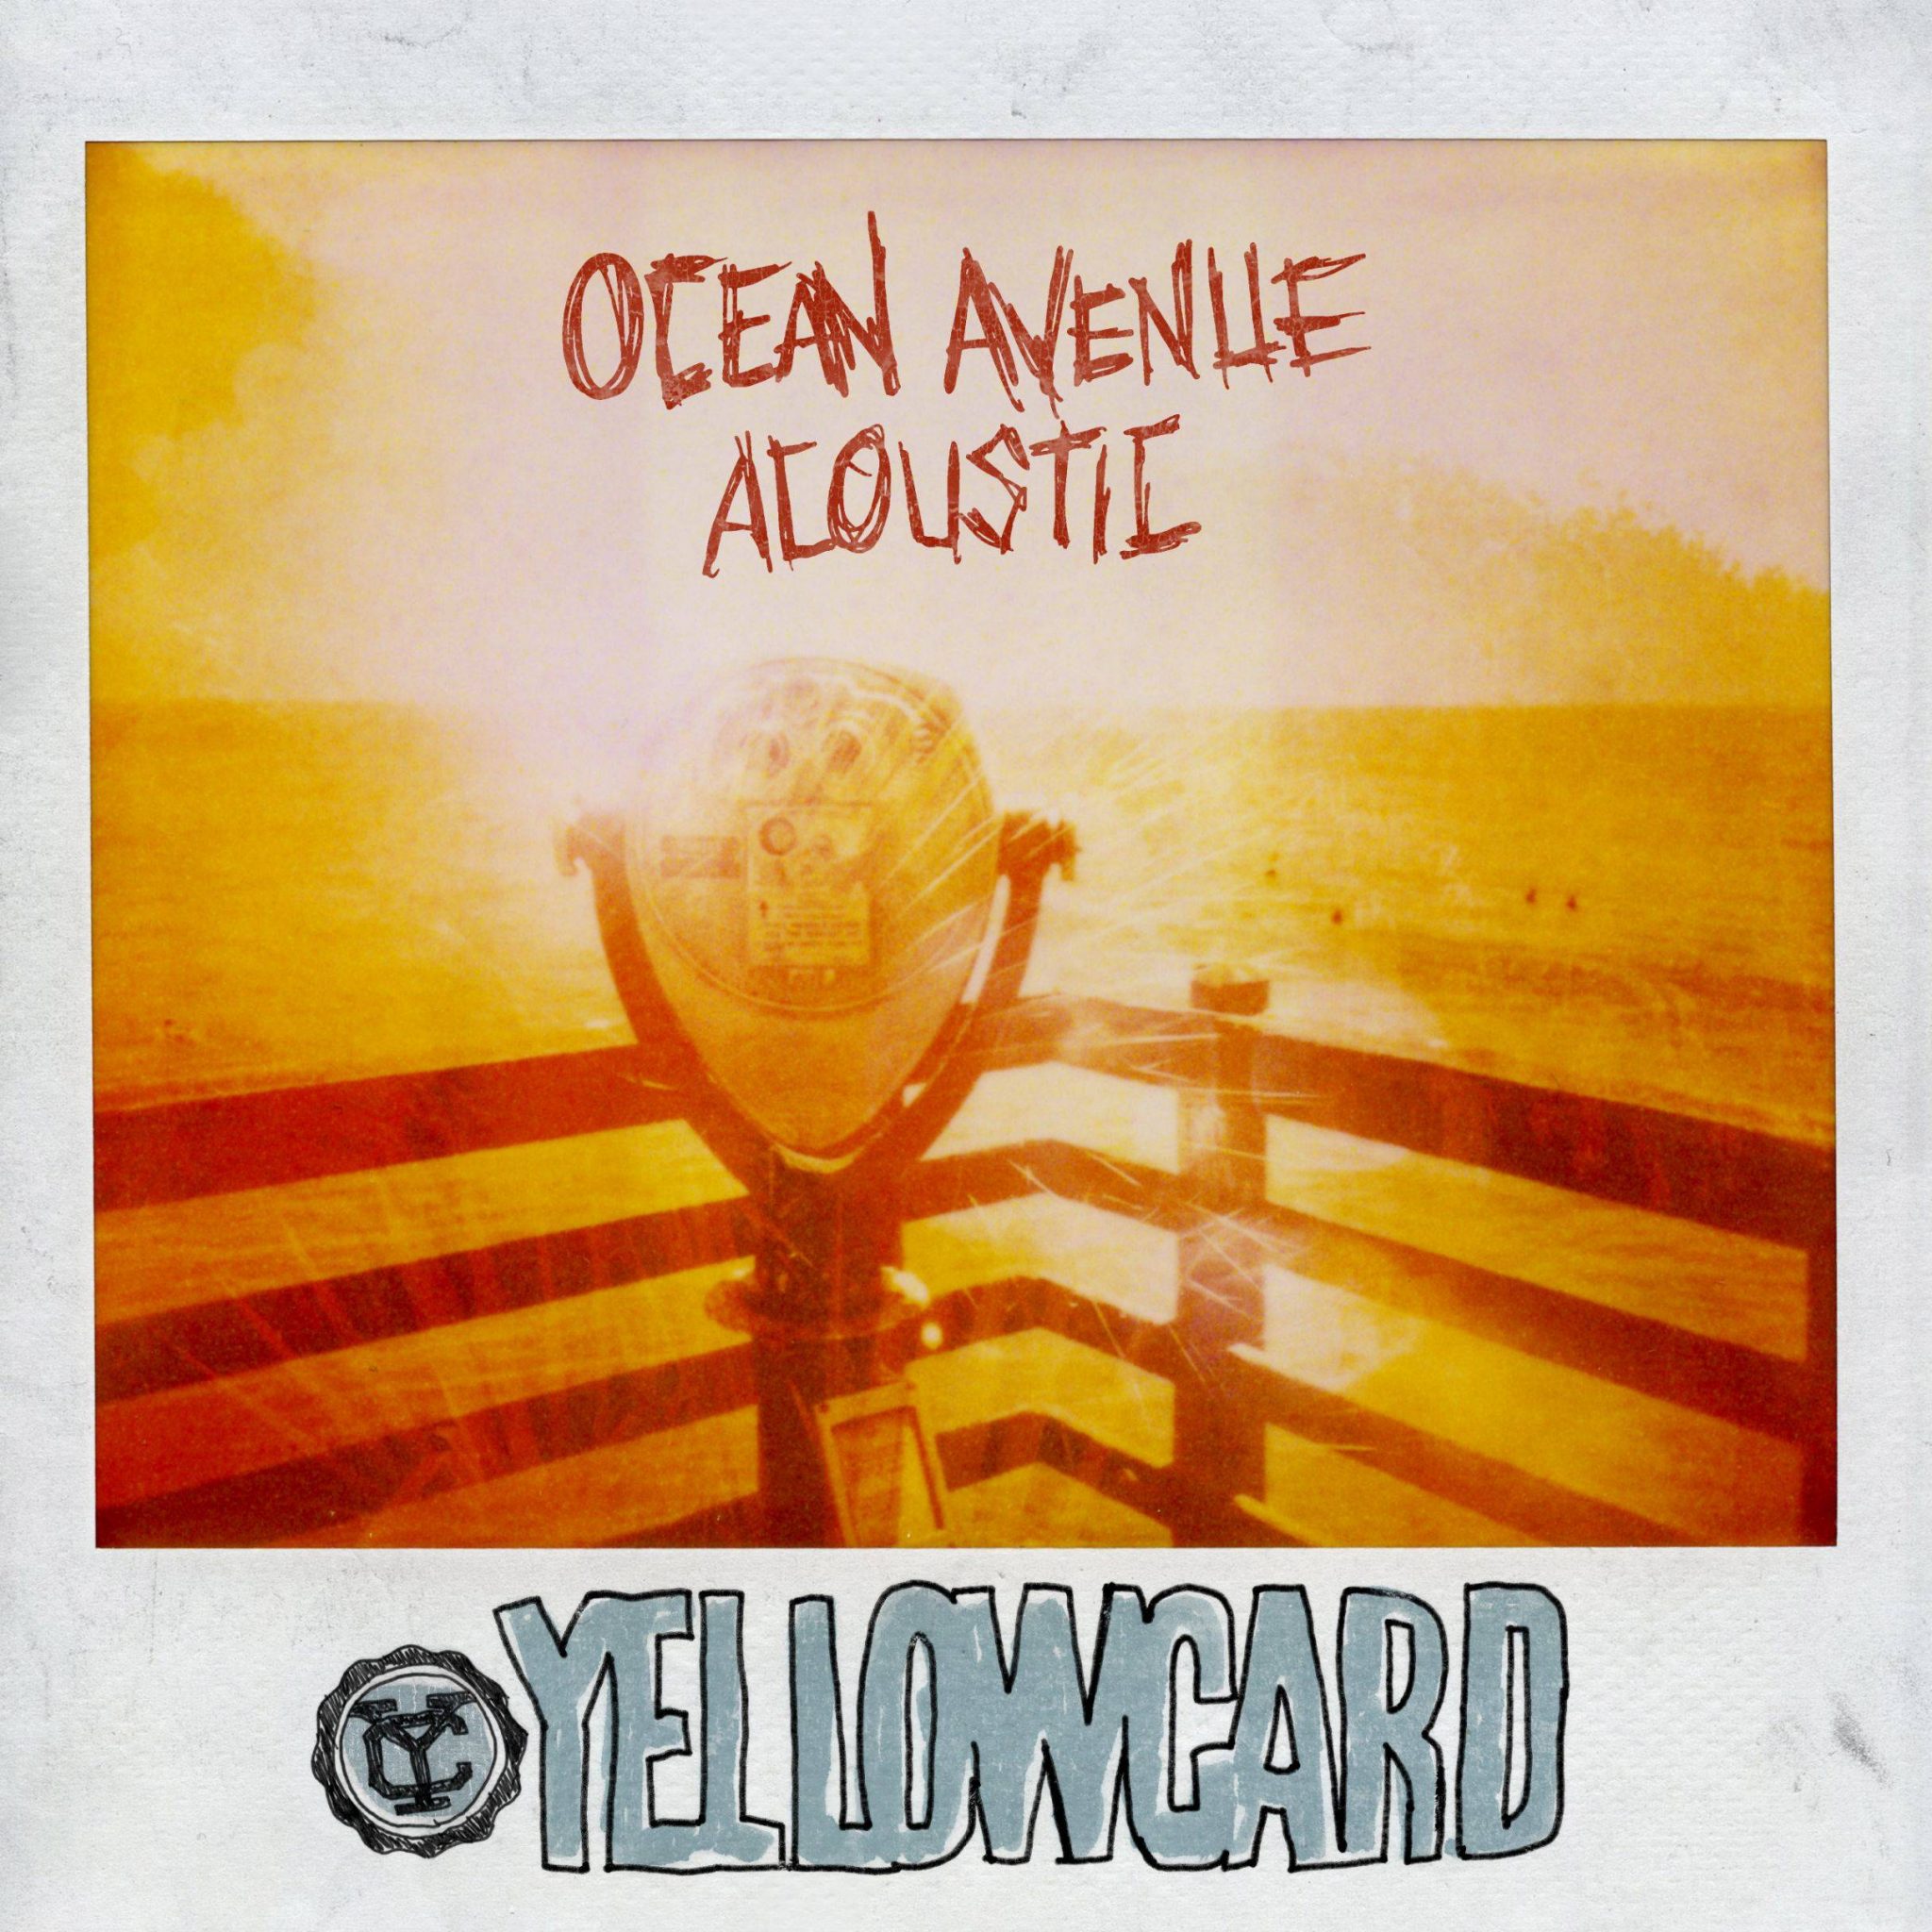 News Added May 05, 2013 Yellowcard fans, start jumping for joy! The band have announced they will be releasing an acoustic version of their 2003 breakthrough album, Ocean Avenue, aptly titled, Ocean Avenue Acoustic Submitted By Chris Track list: Added May 05, 2013 "Way Away" – 3:22 "Breathing" – 3:38 "Ocean Avenue" – 3:19 "Empty […]